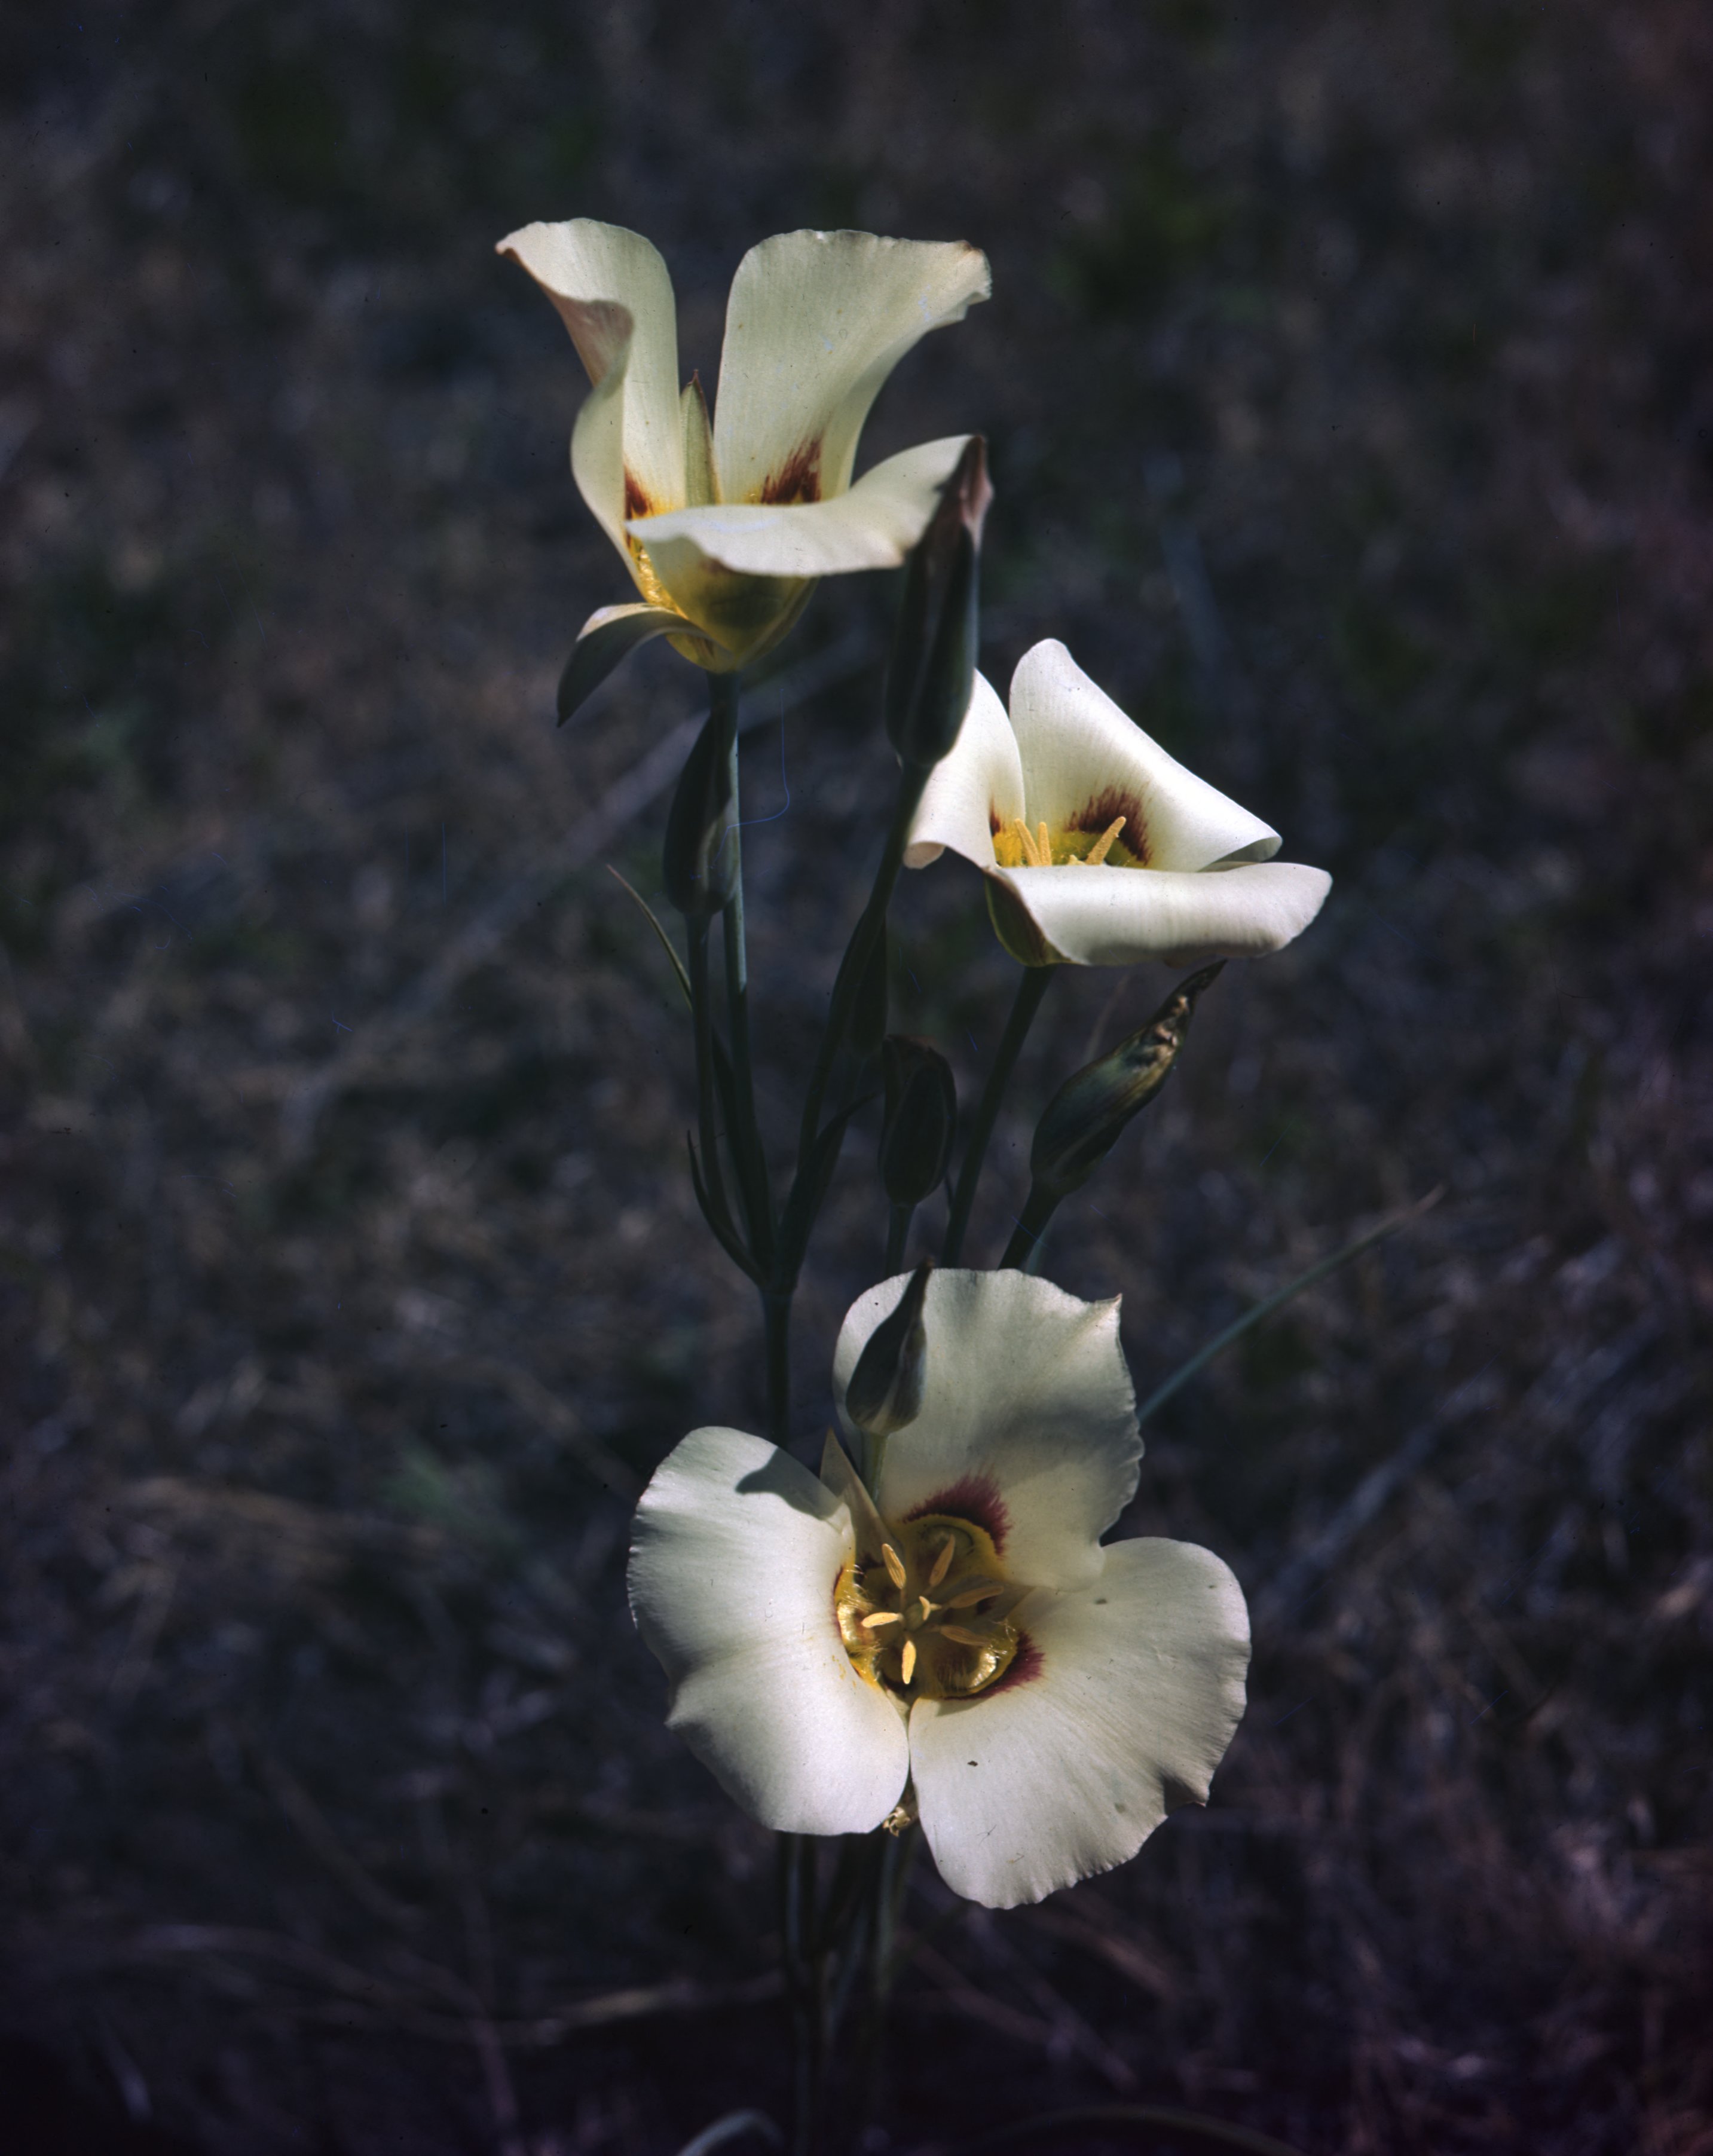 Sego Lily Department Of Heritage And Arts J Willard Marriott Digital Library